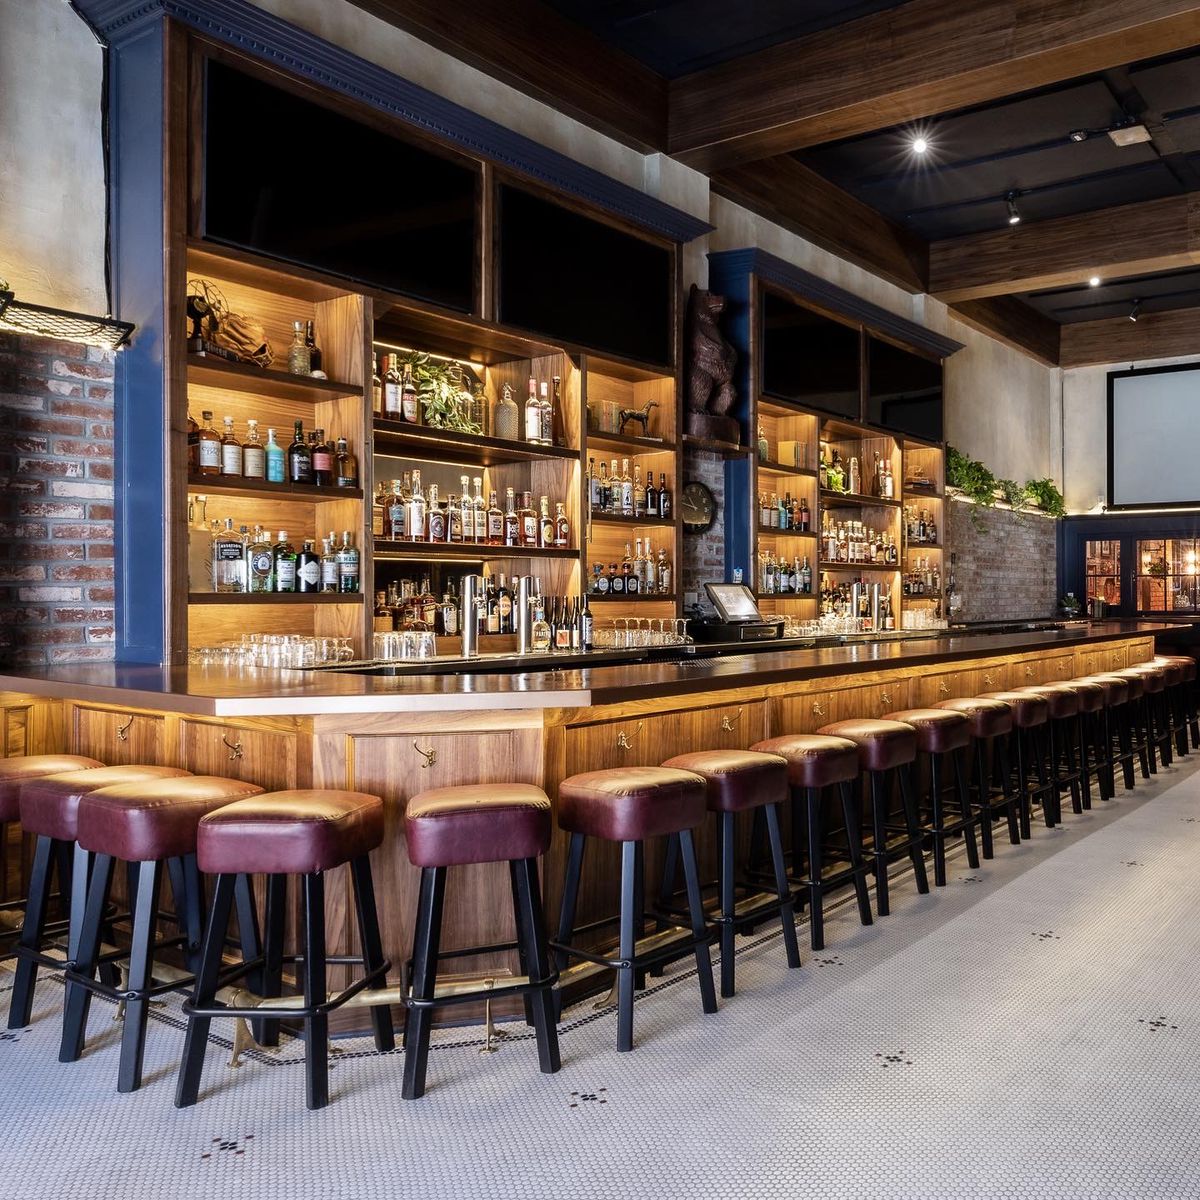 A view of a bar with leather stools.